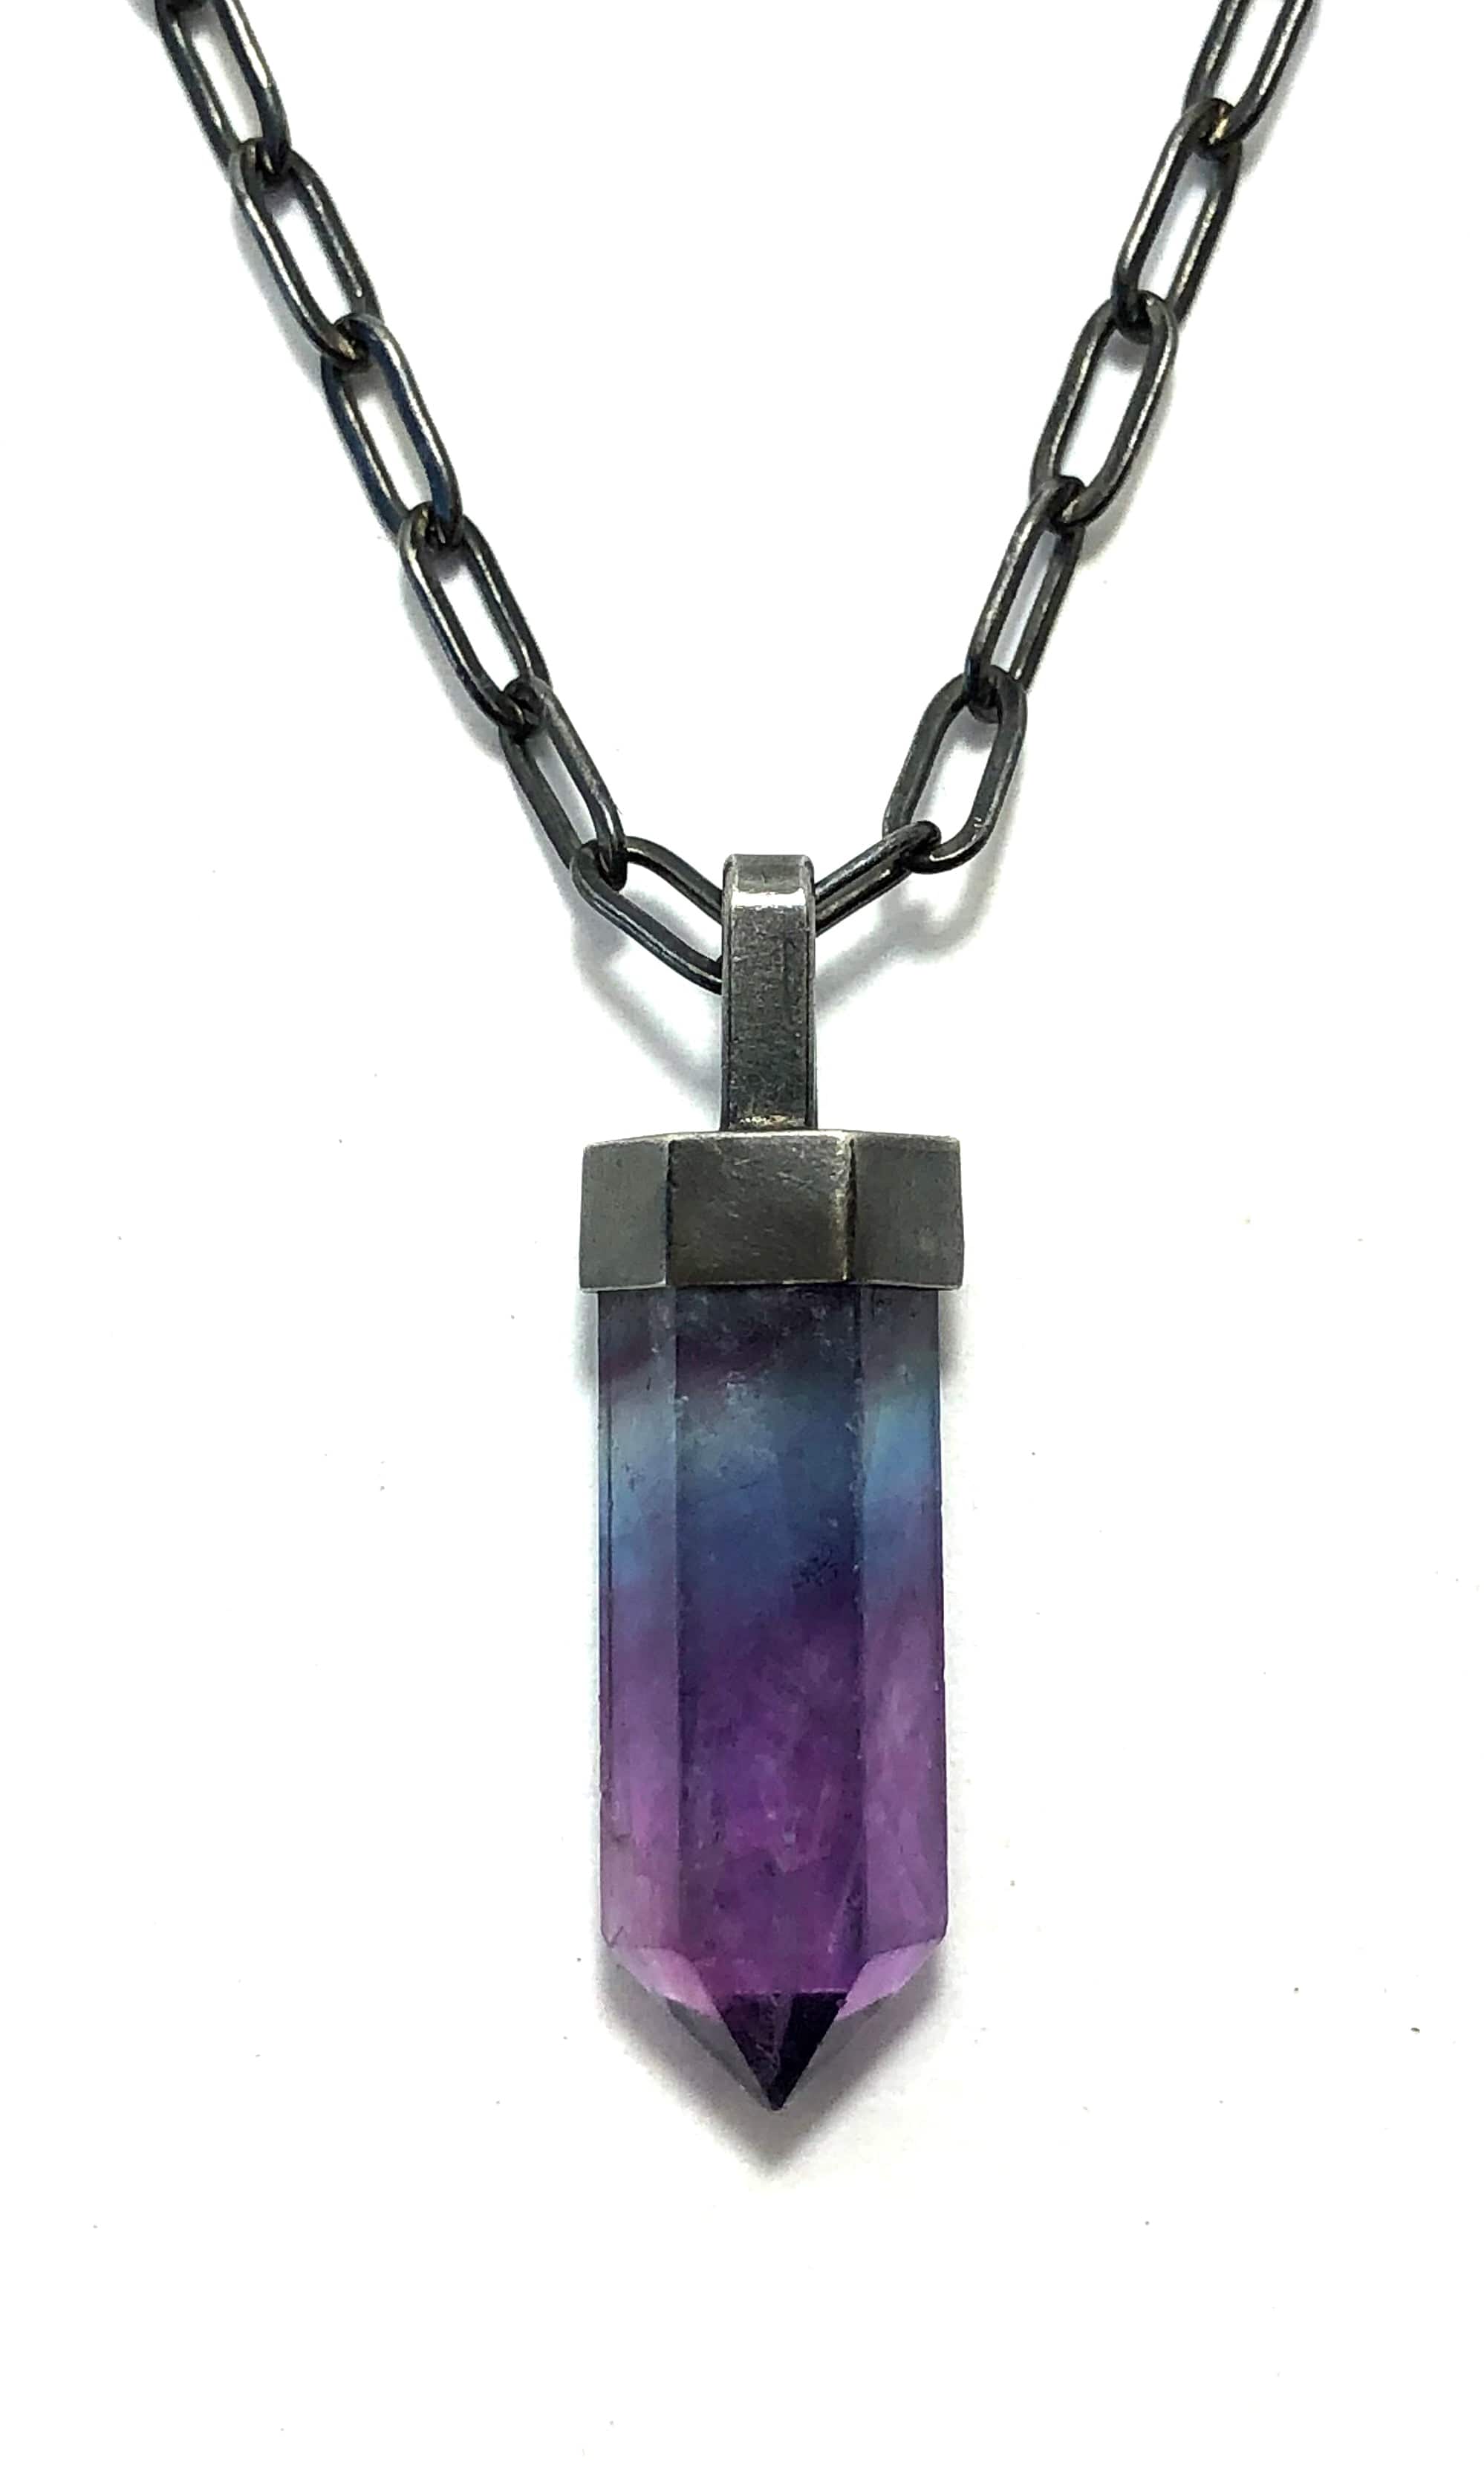 Fluorite crystal pendant on oxidized sterling silver chain